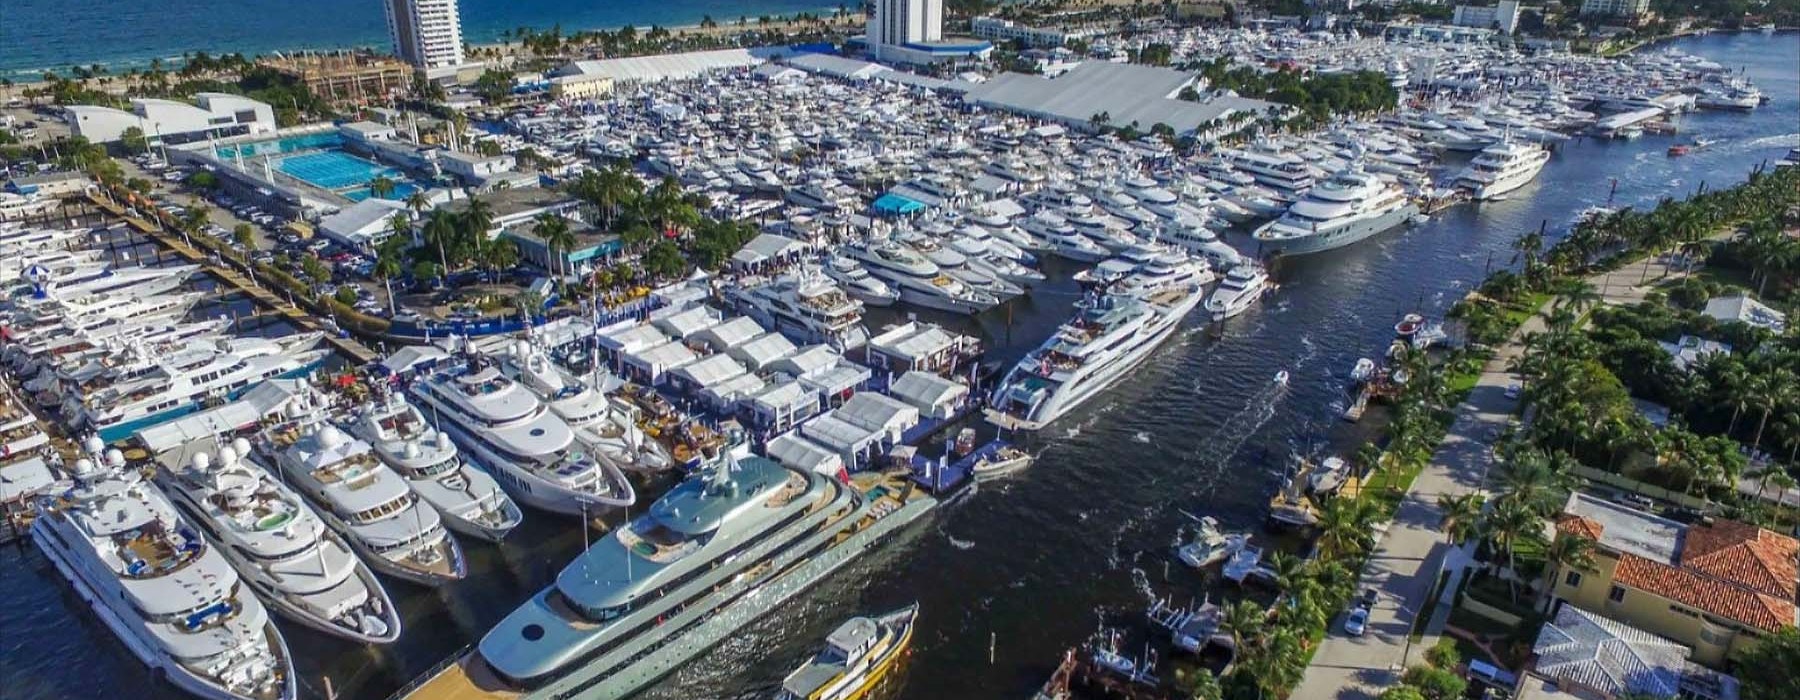 Fort-Lauderdale-IBoat-Show-2019